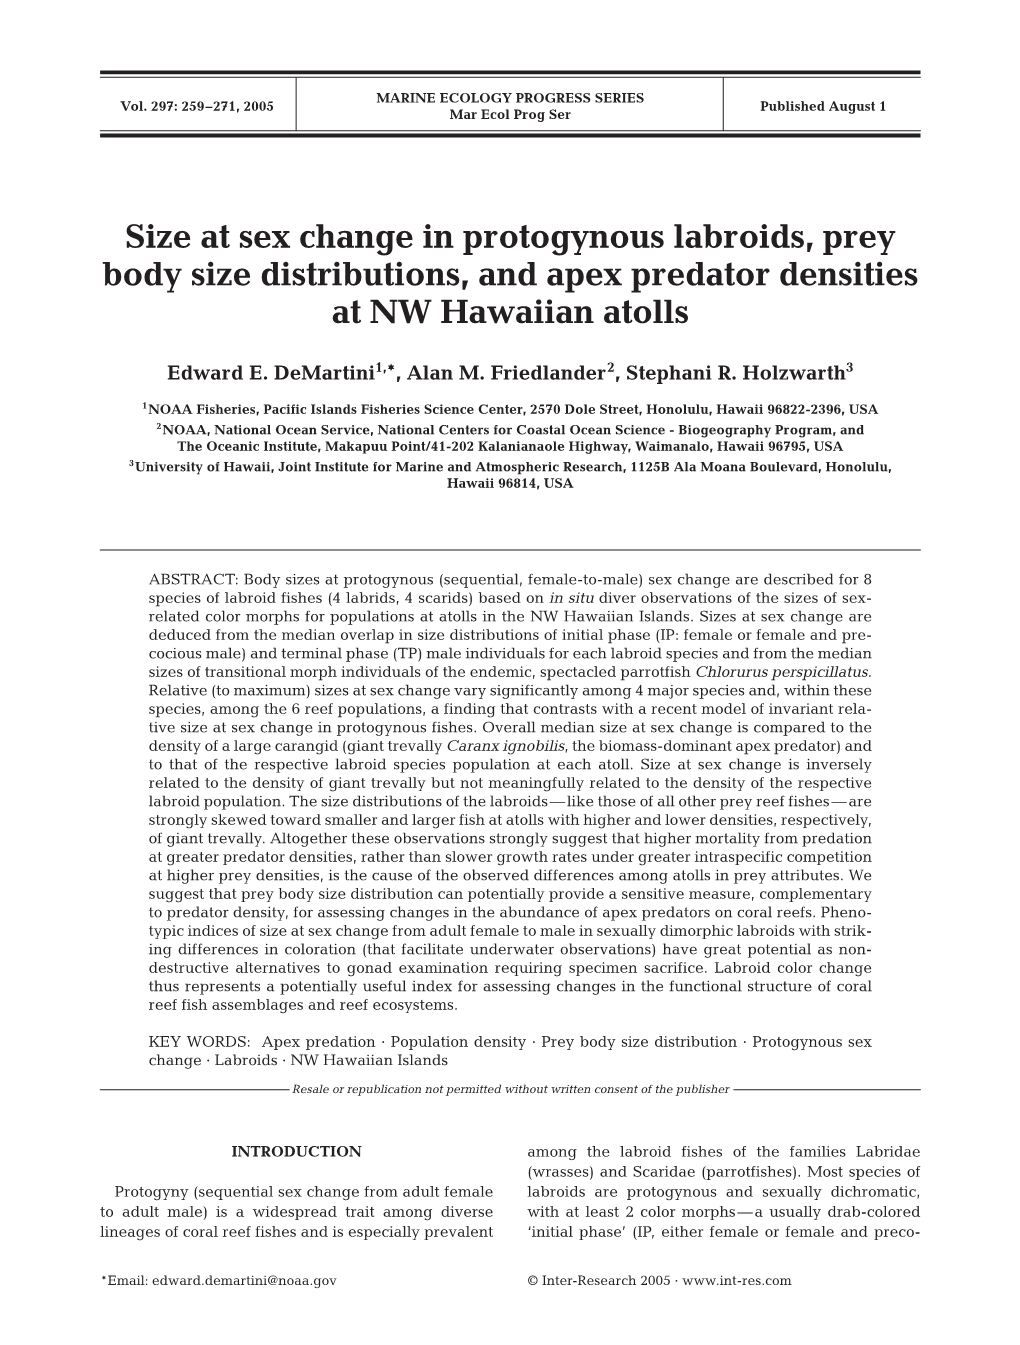 Size at Sex Change in Protogynous Labroids, Prey Body Size Distributions, and Apex Predator Densities at NW Hawaiian Atolls